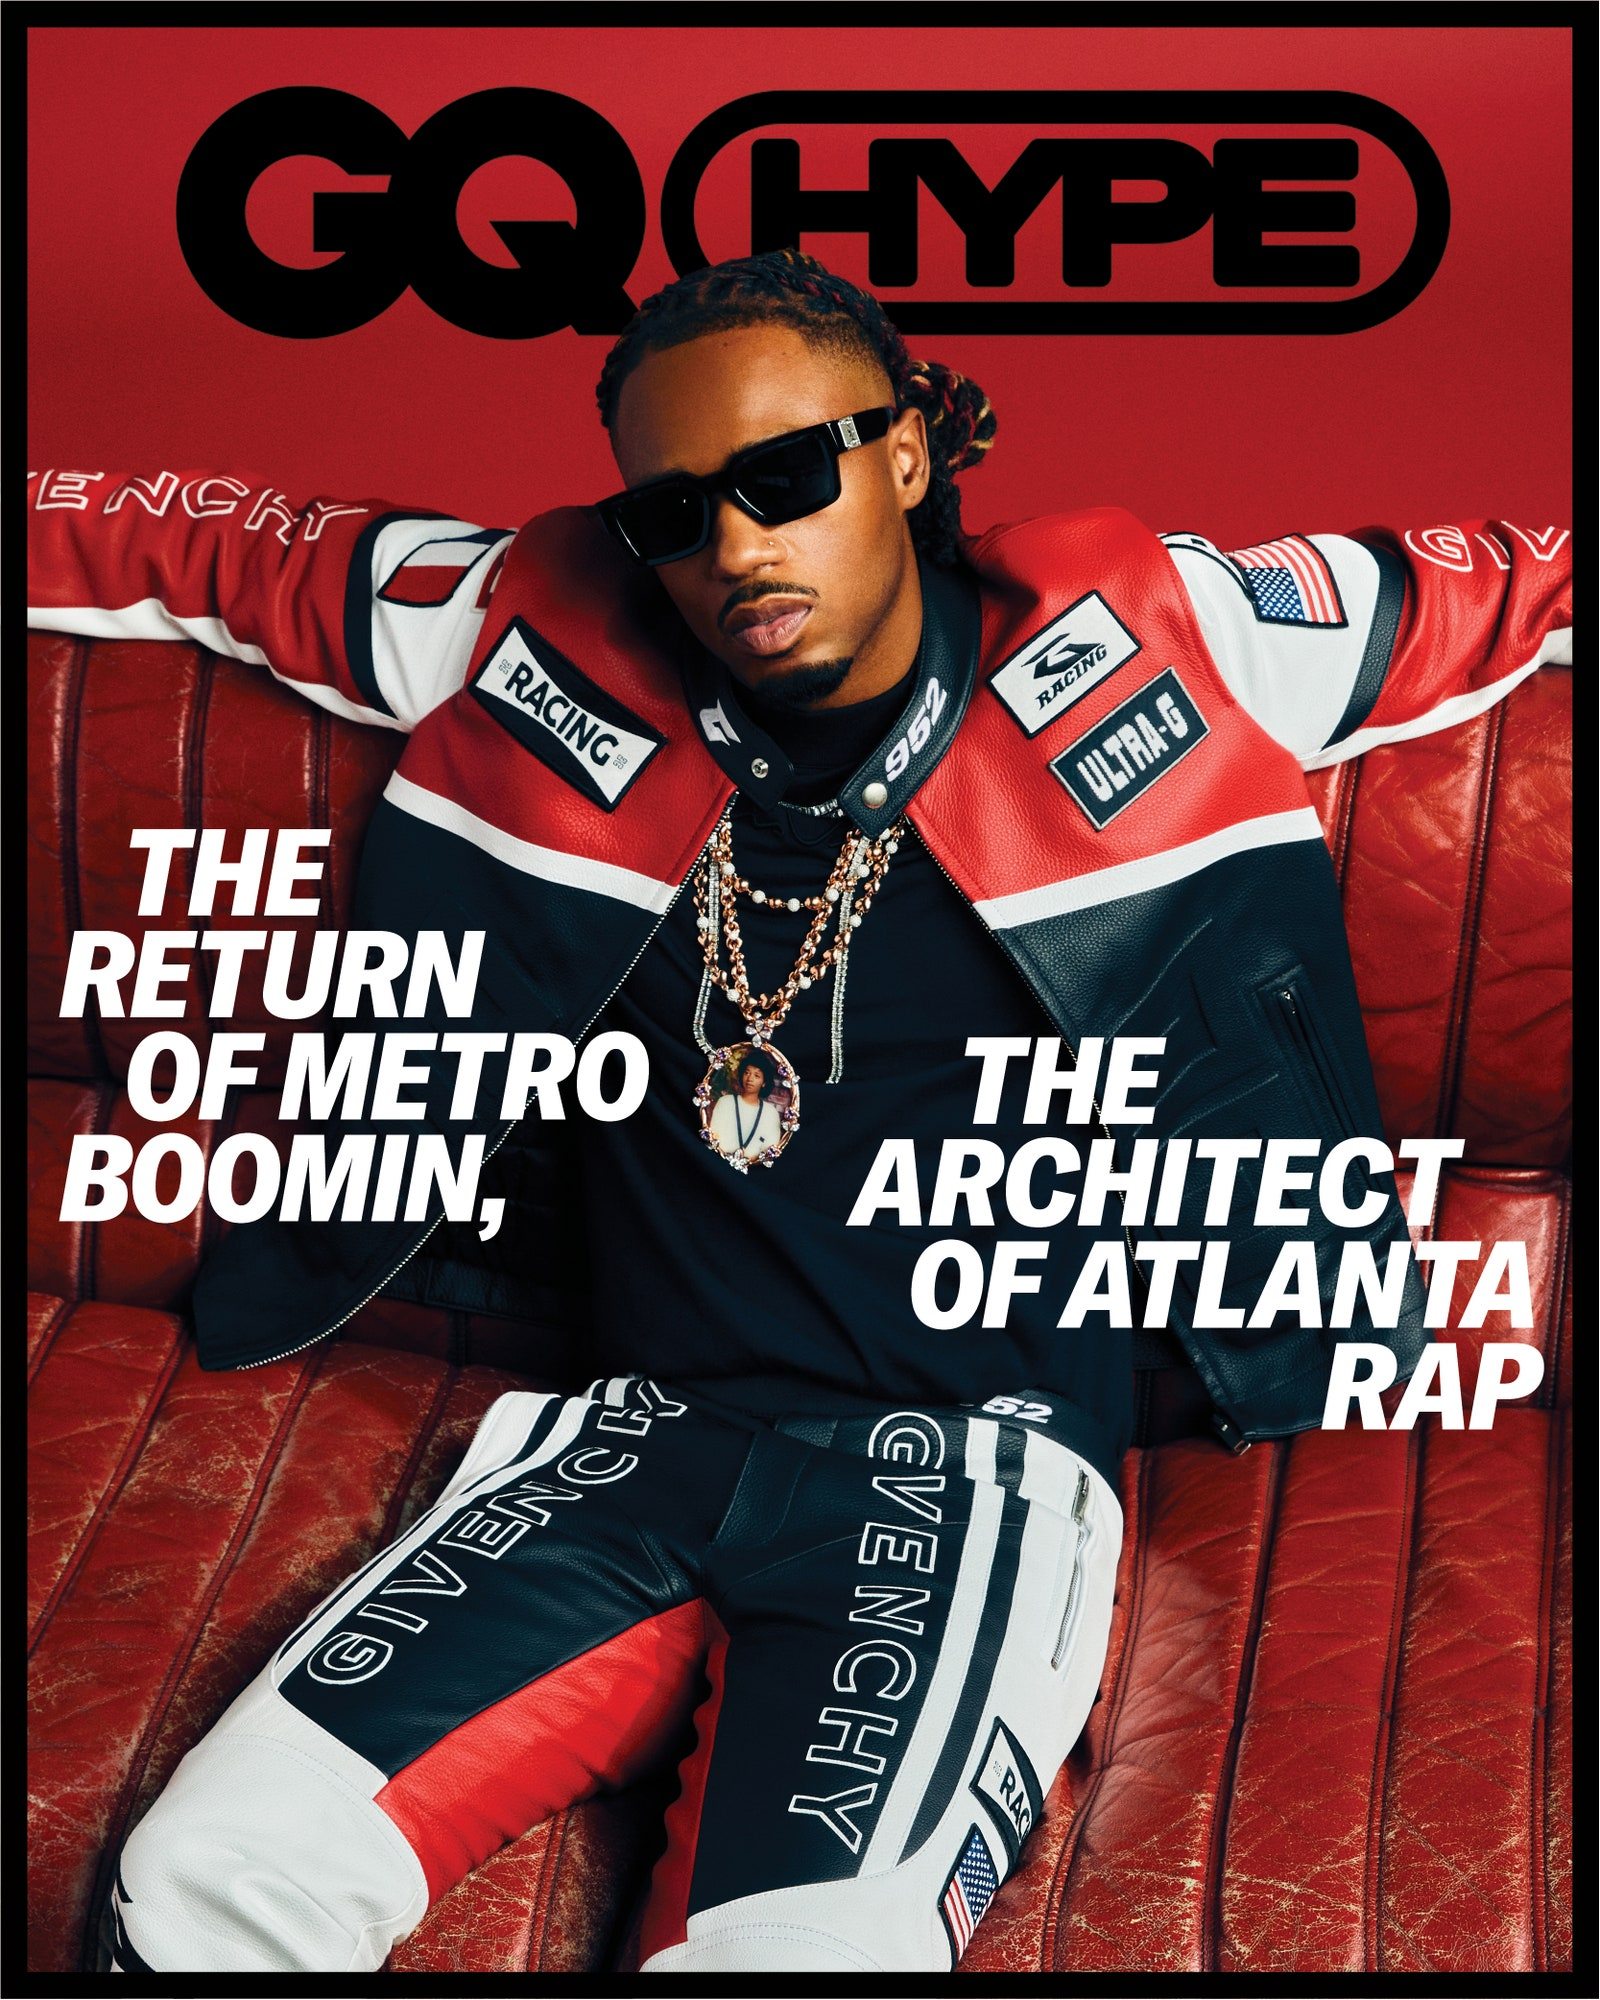 GQ Threw a Rager with Superhero Producer Metro Boomin